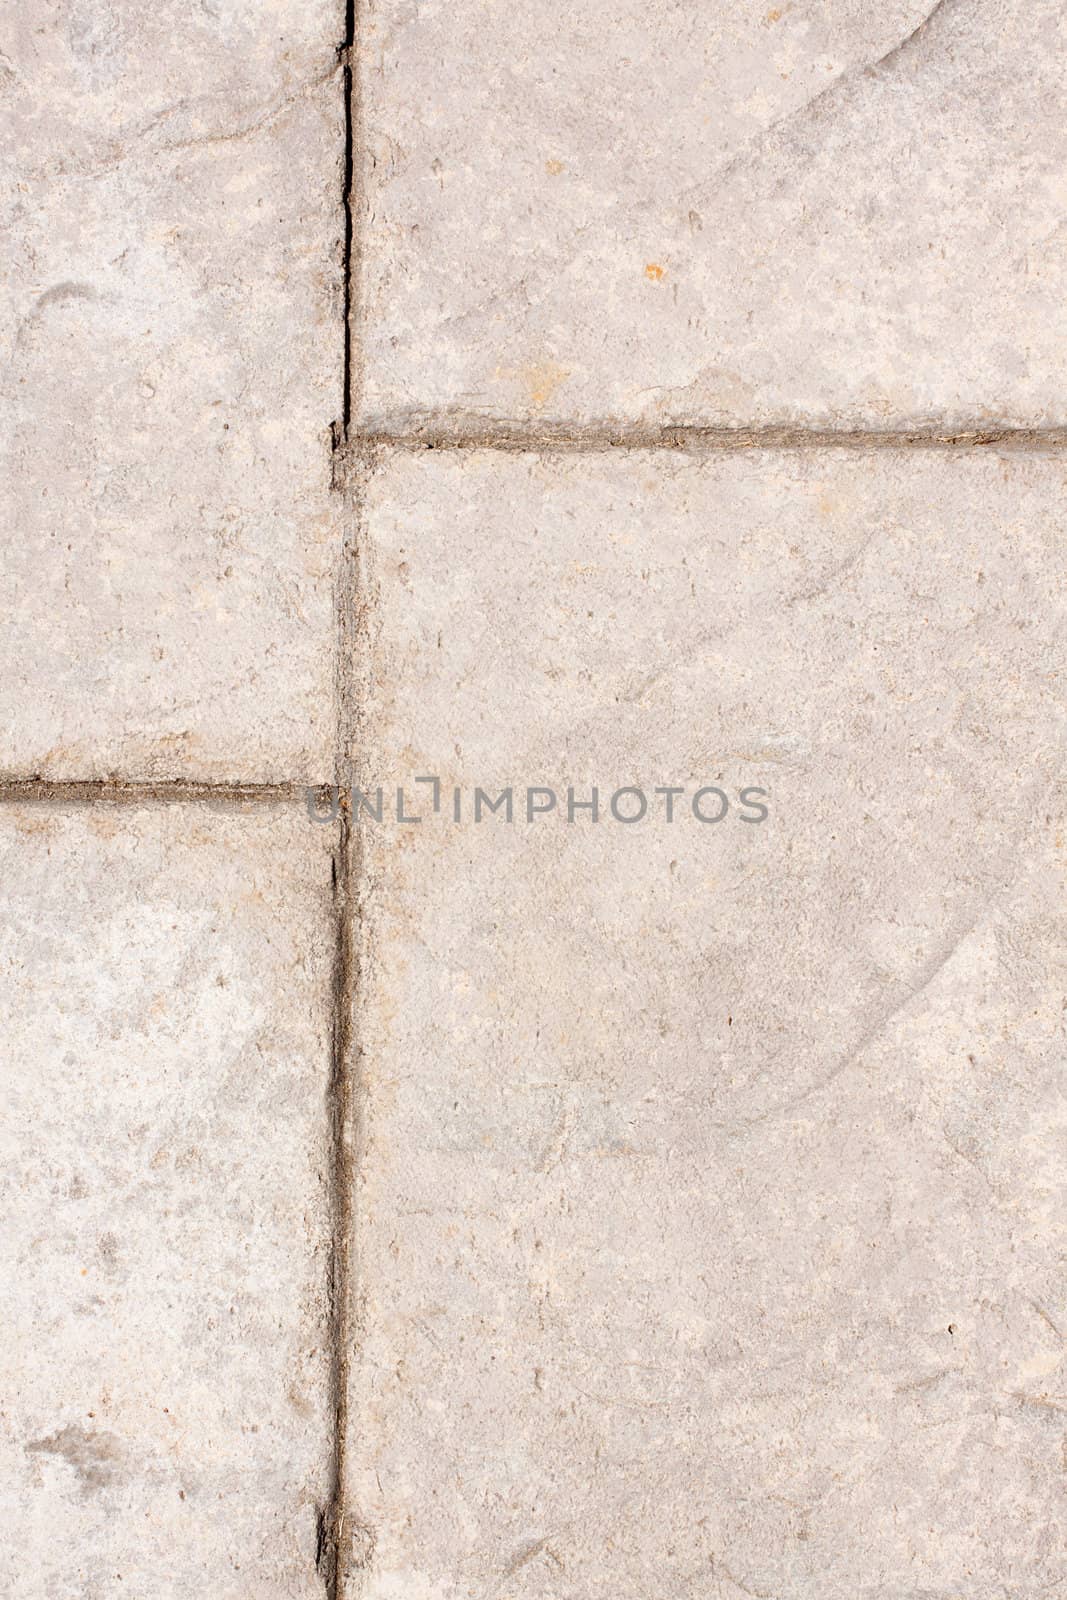 A stone checkerboard background texture detail from a sidewalk.